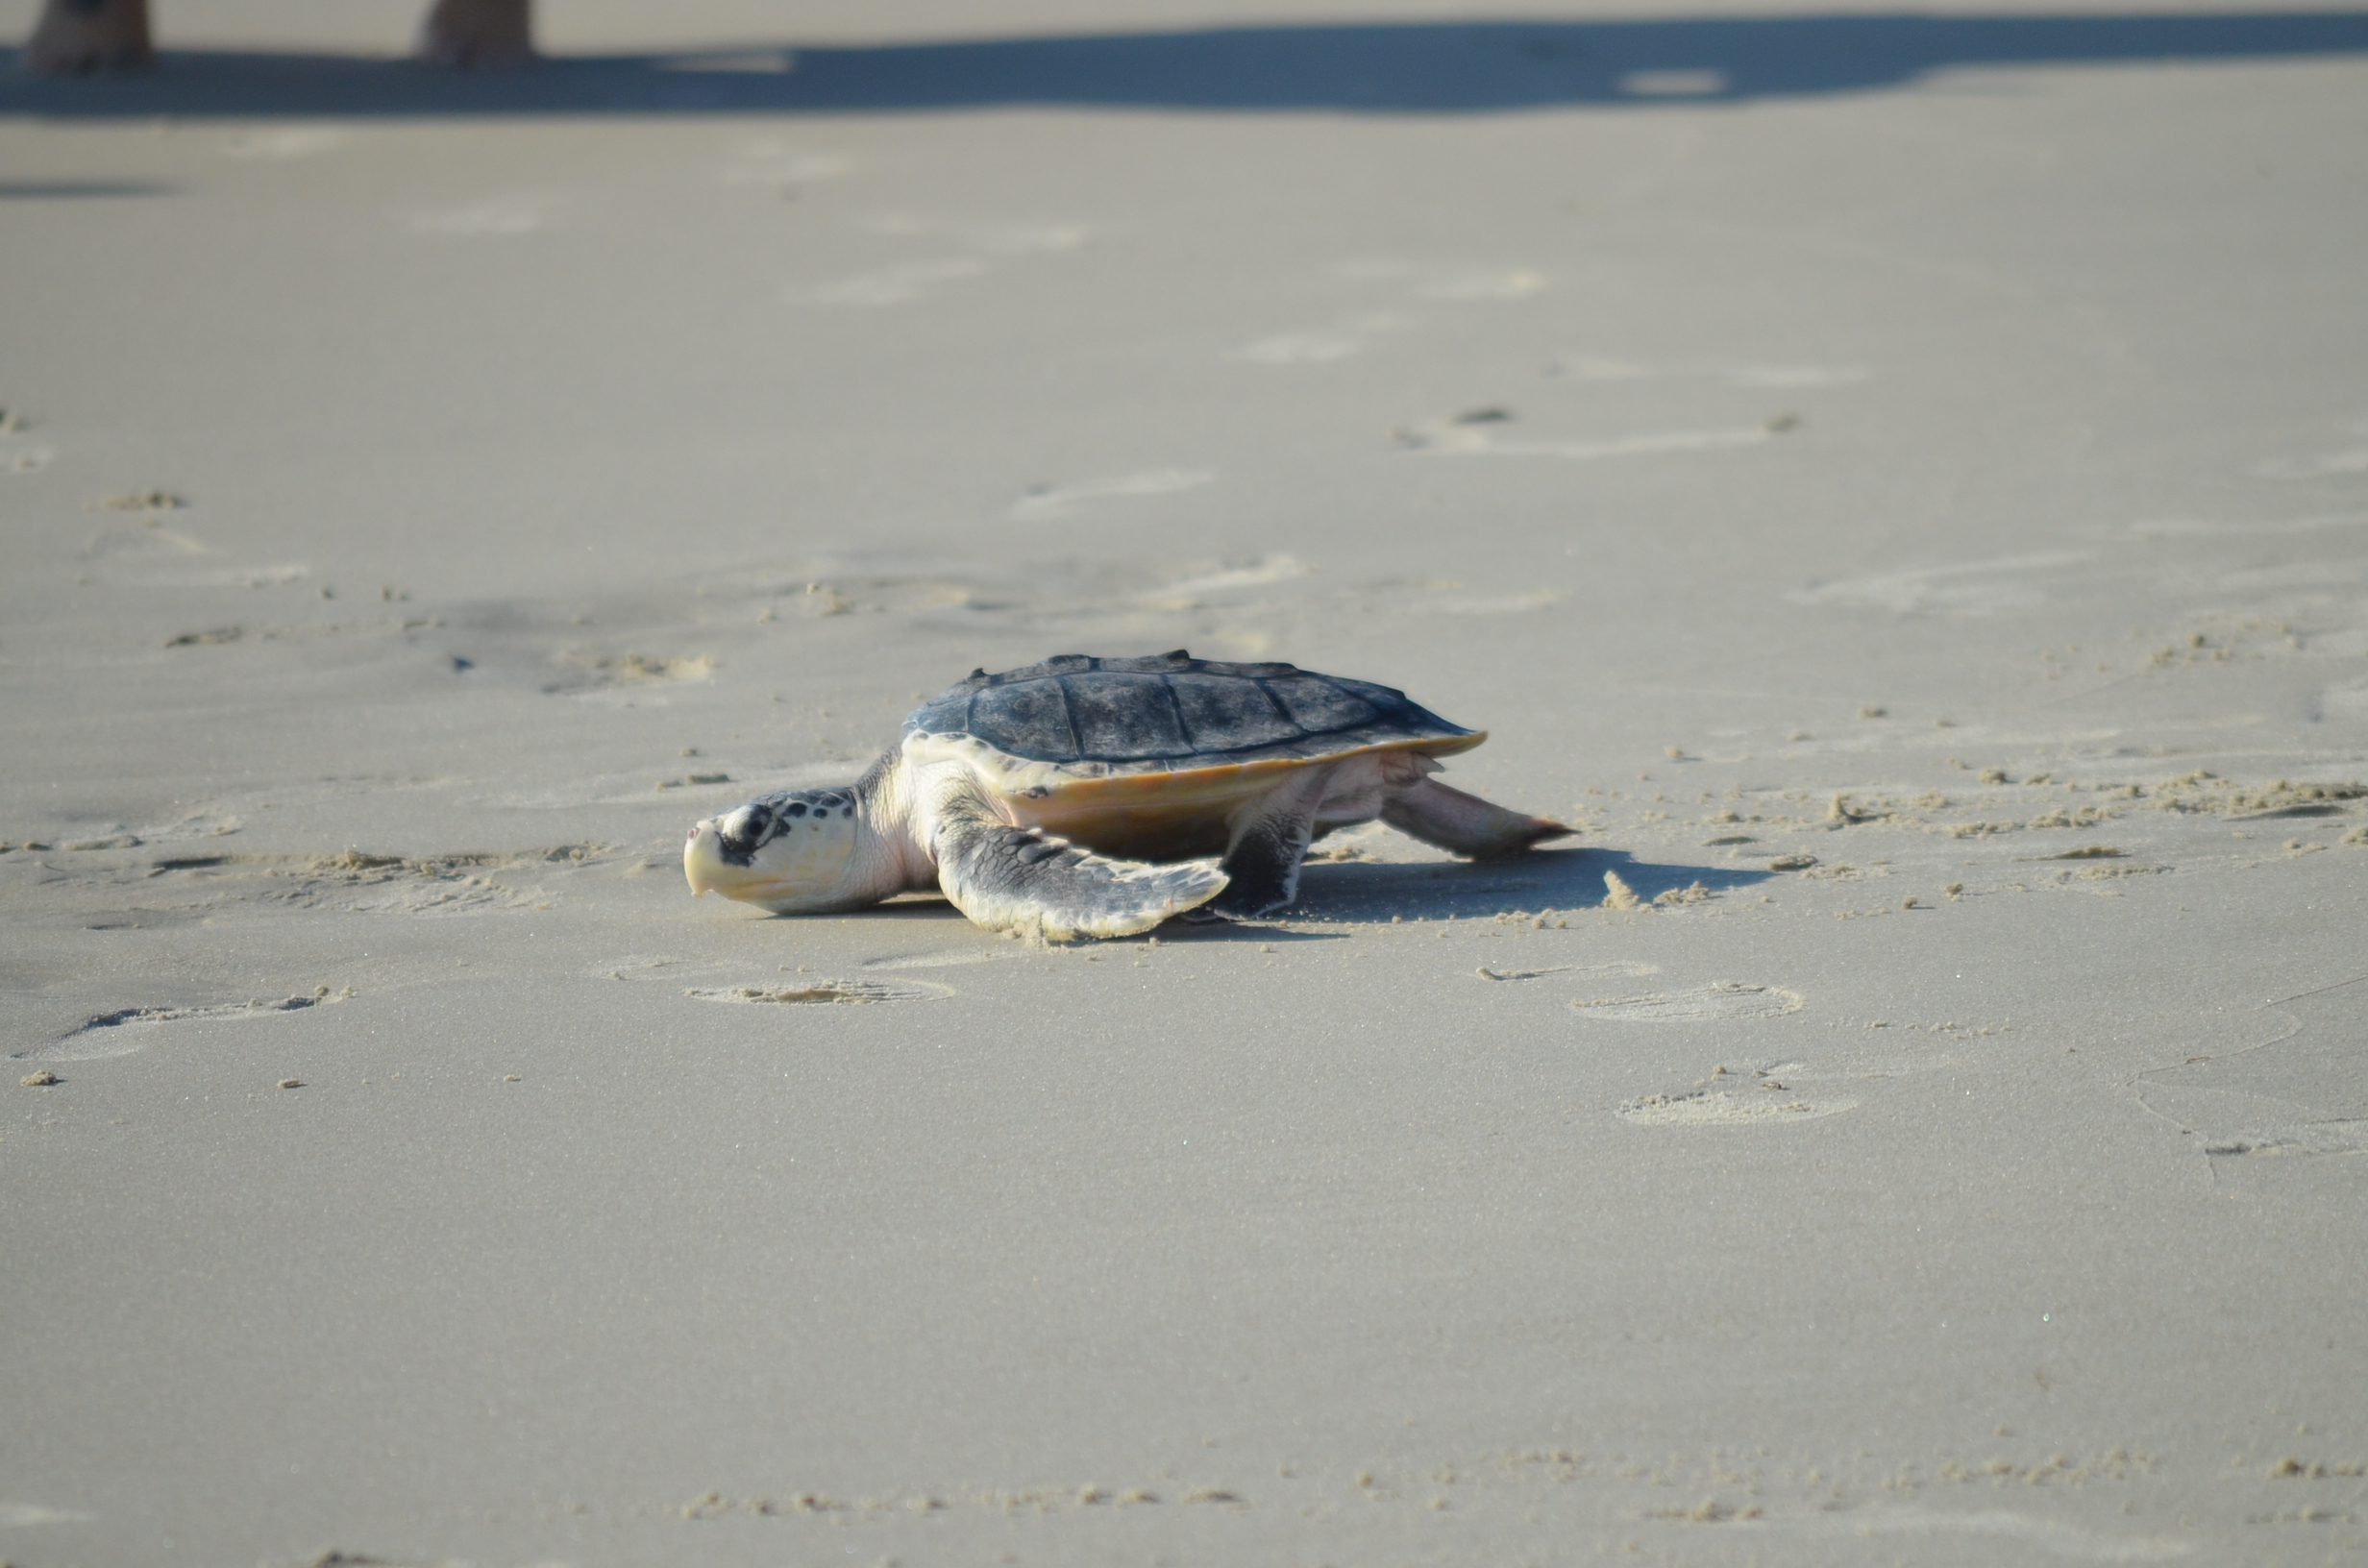 Loggerhead sea turtle on its way to the ocean during a sea turtle release.